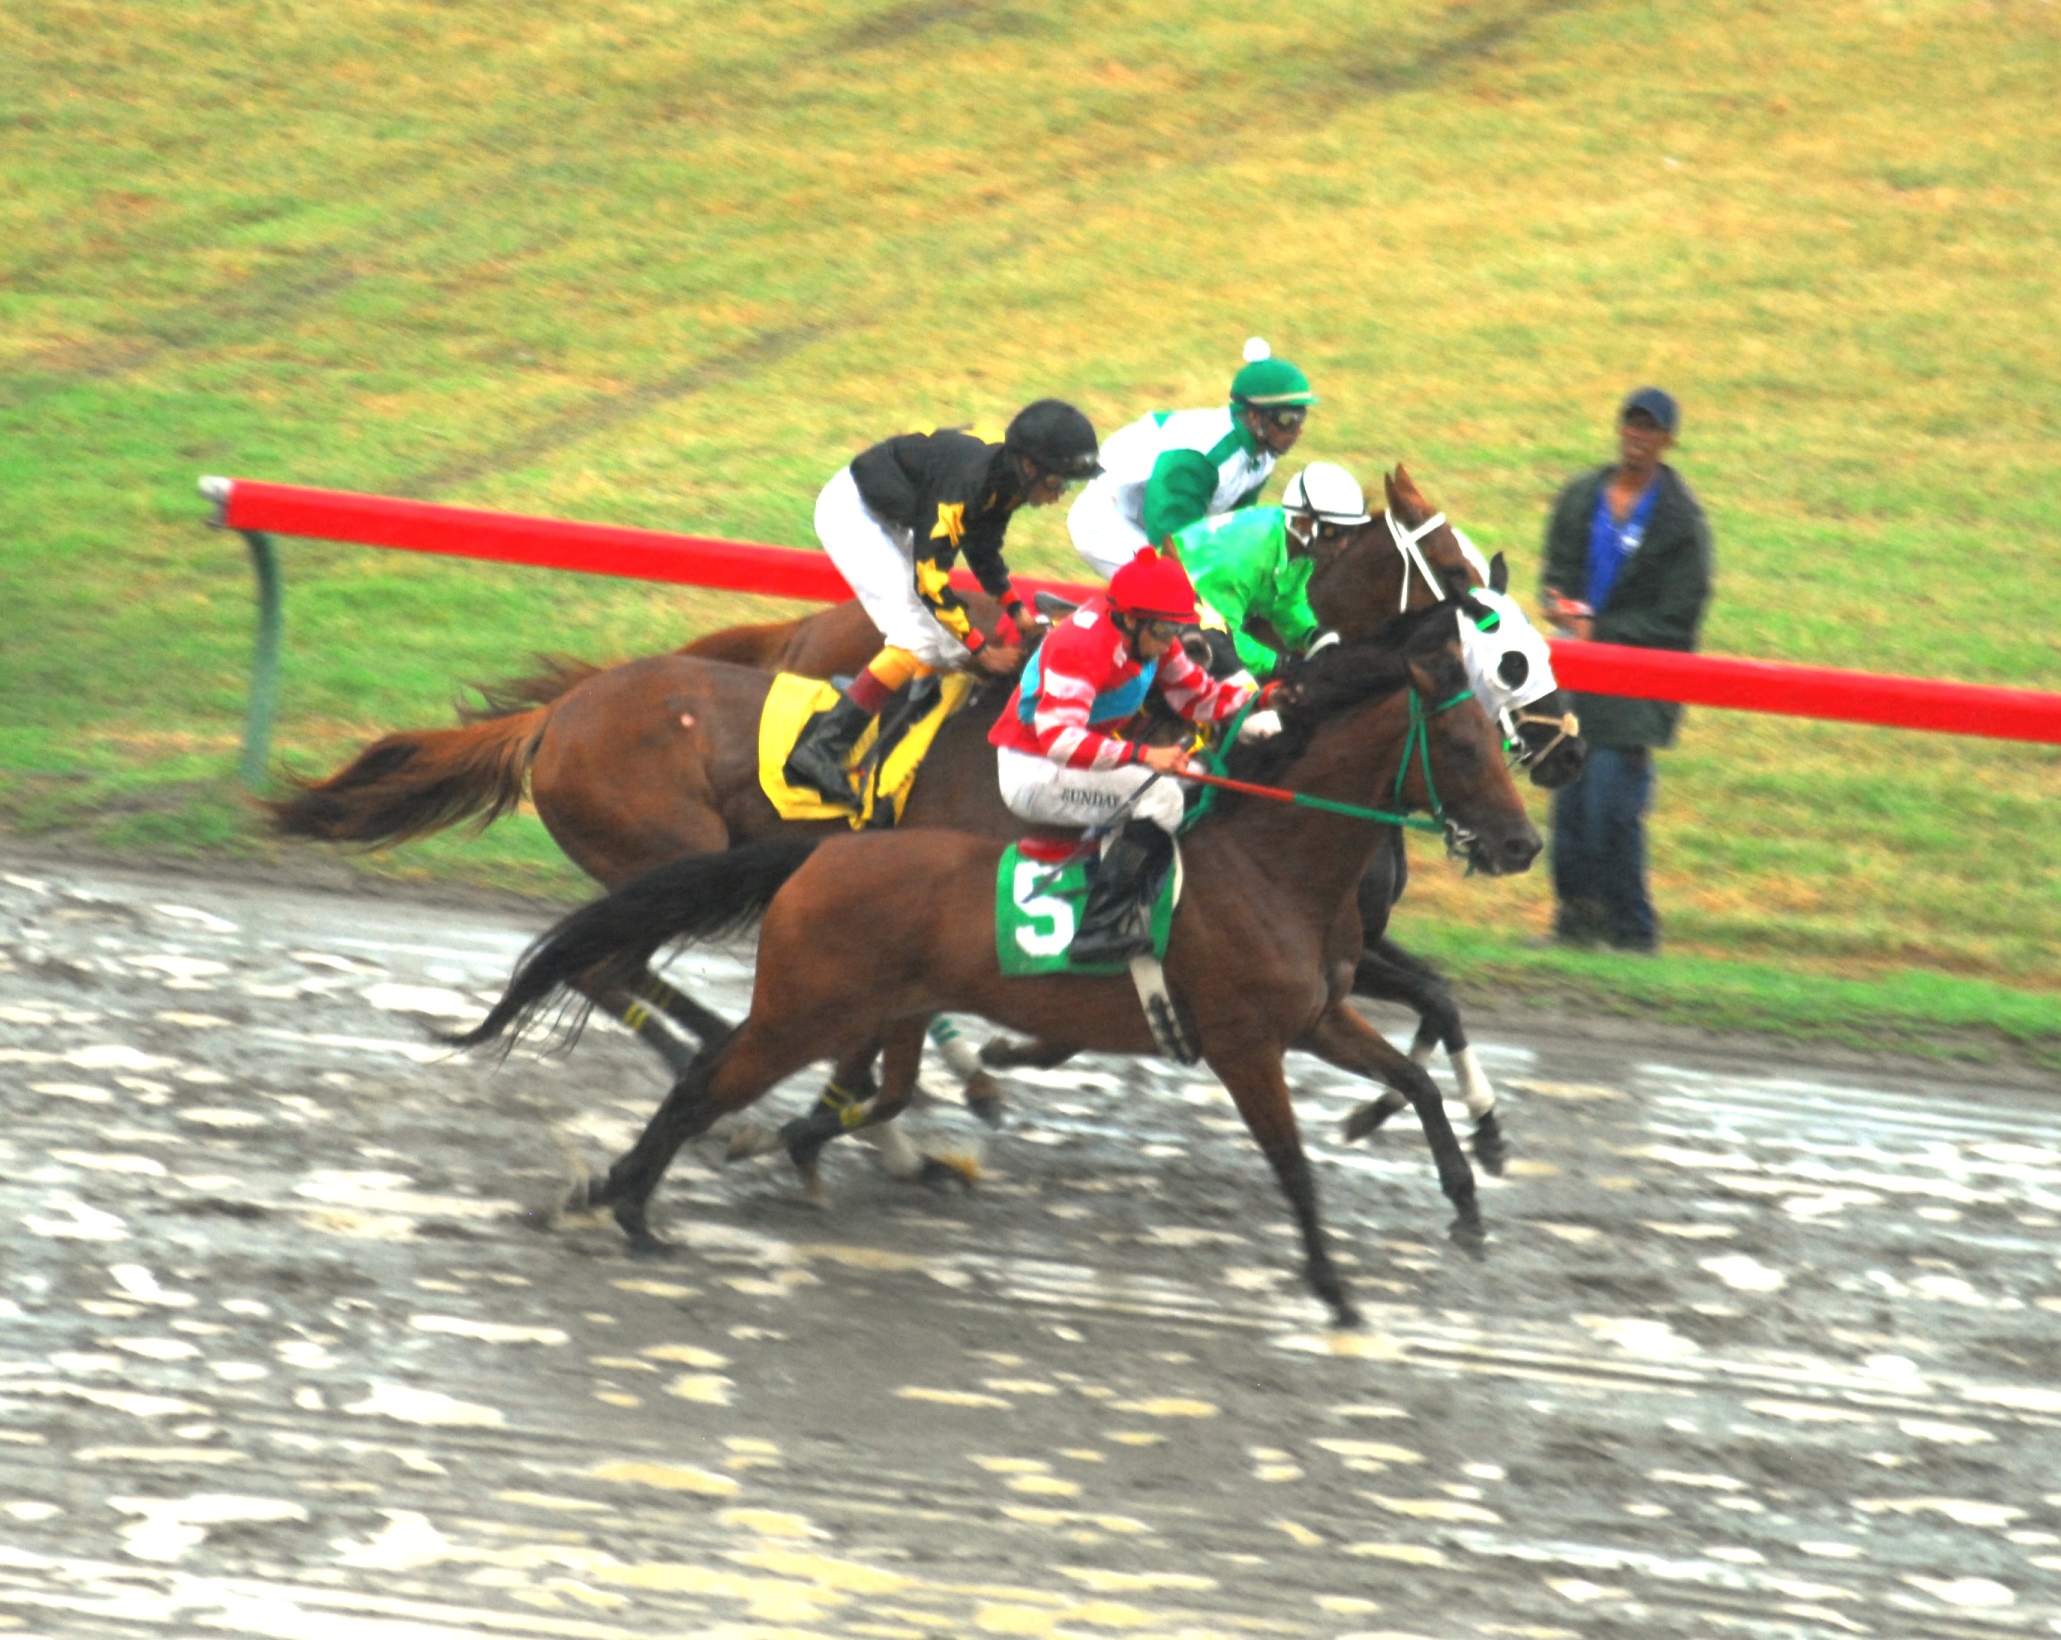 Sloppy conditions could not stop the show at the Randall “Doc” James race track Sunday.